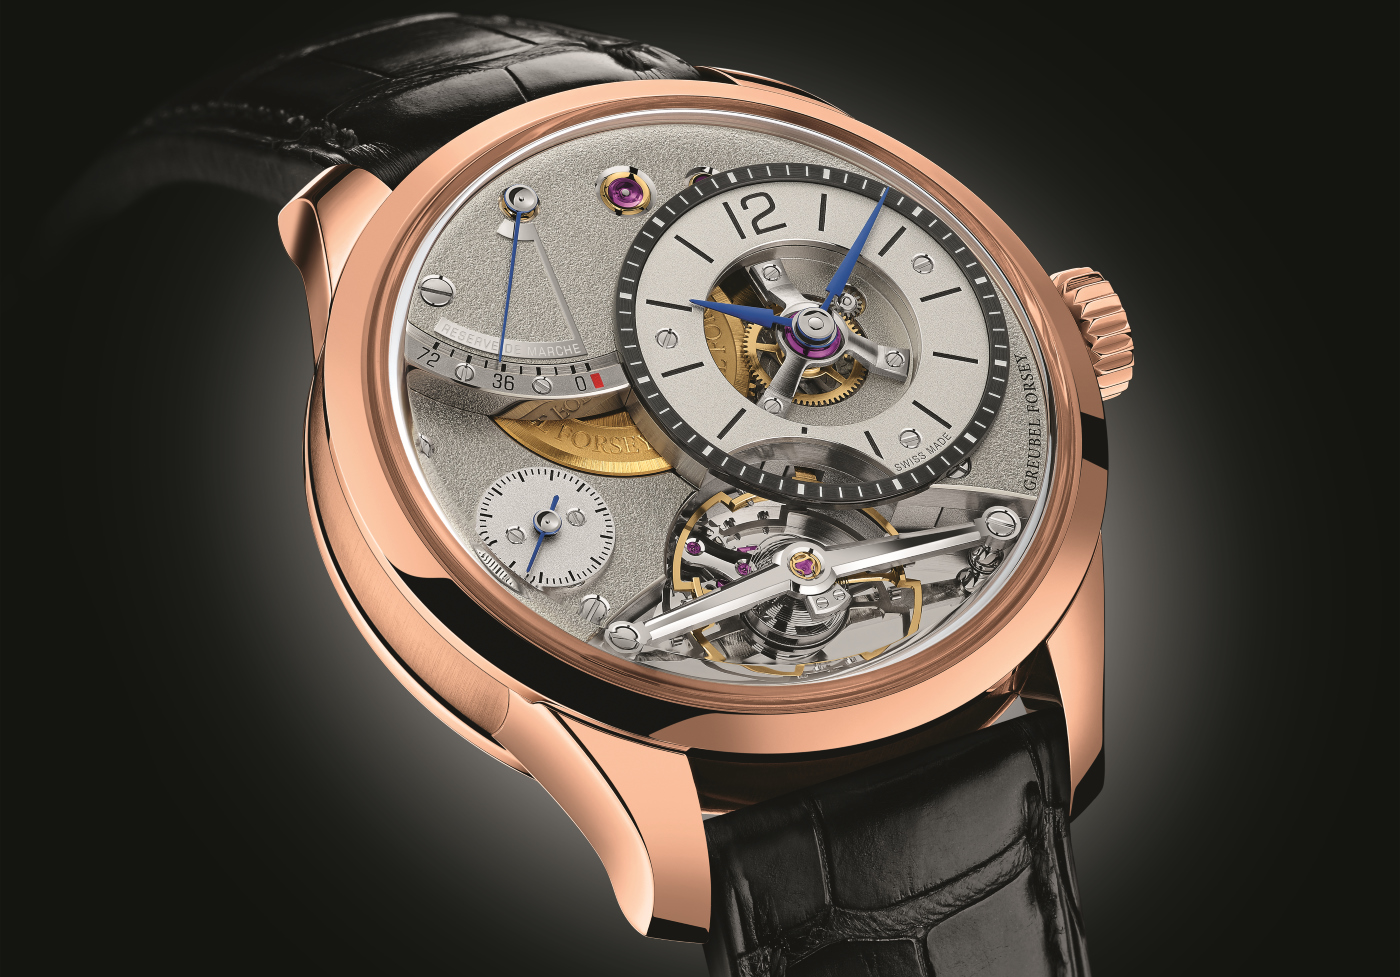 Greubel Forsey: a new red gold case for the Balancier Contemporain